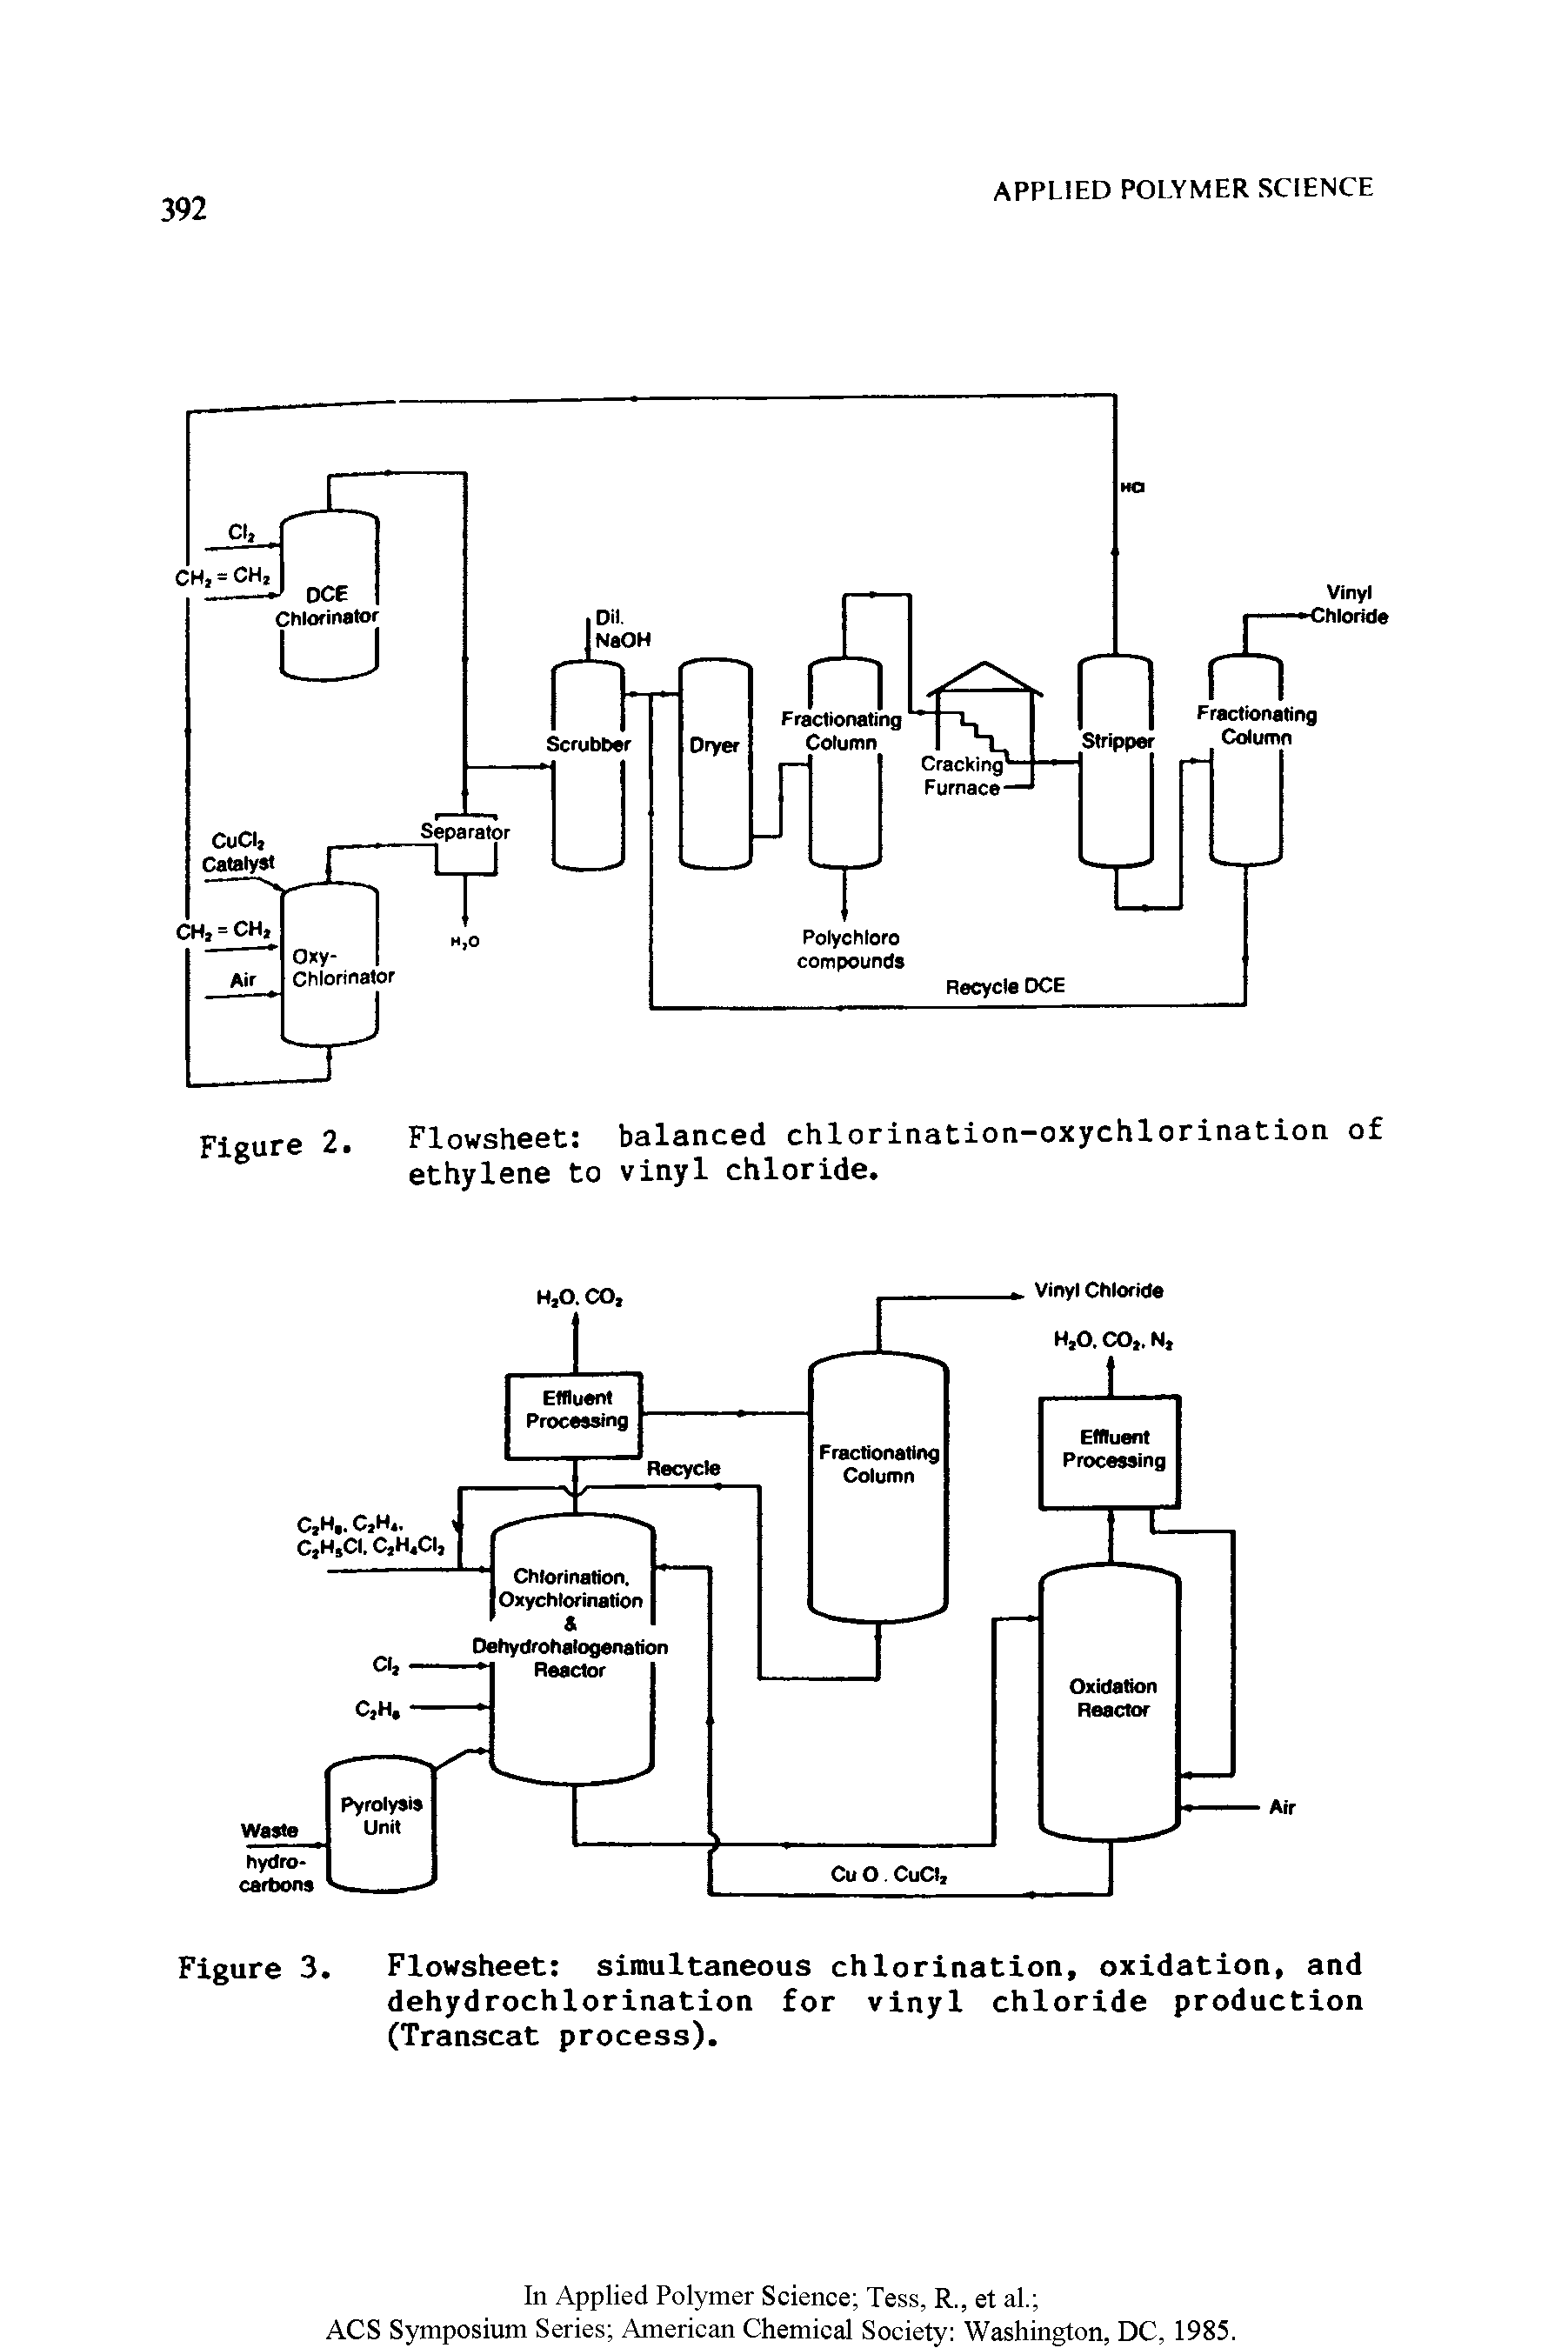 Figure 3. Flowsheet simultaneous chlorination, oxidation, and dehydrochlorination for vinyl chloride production (Transcat process).